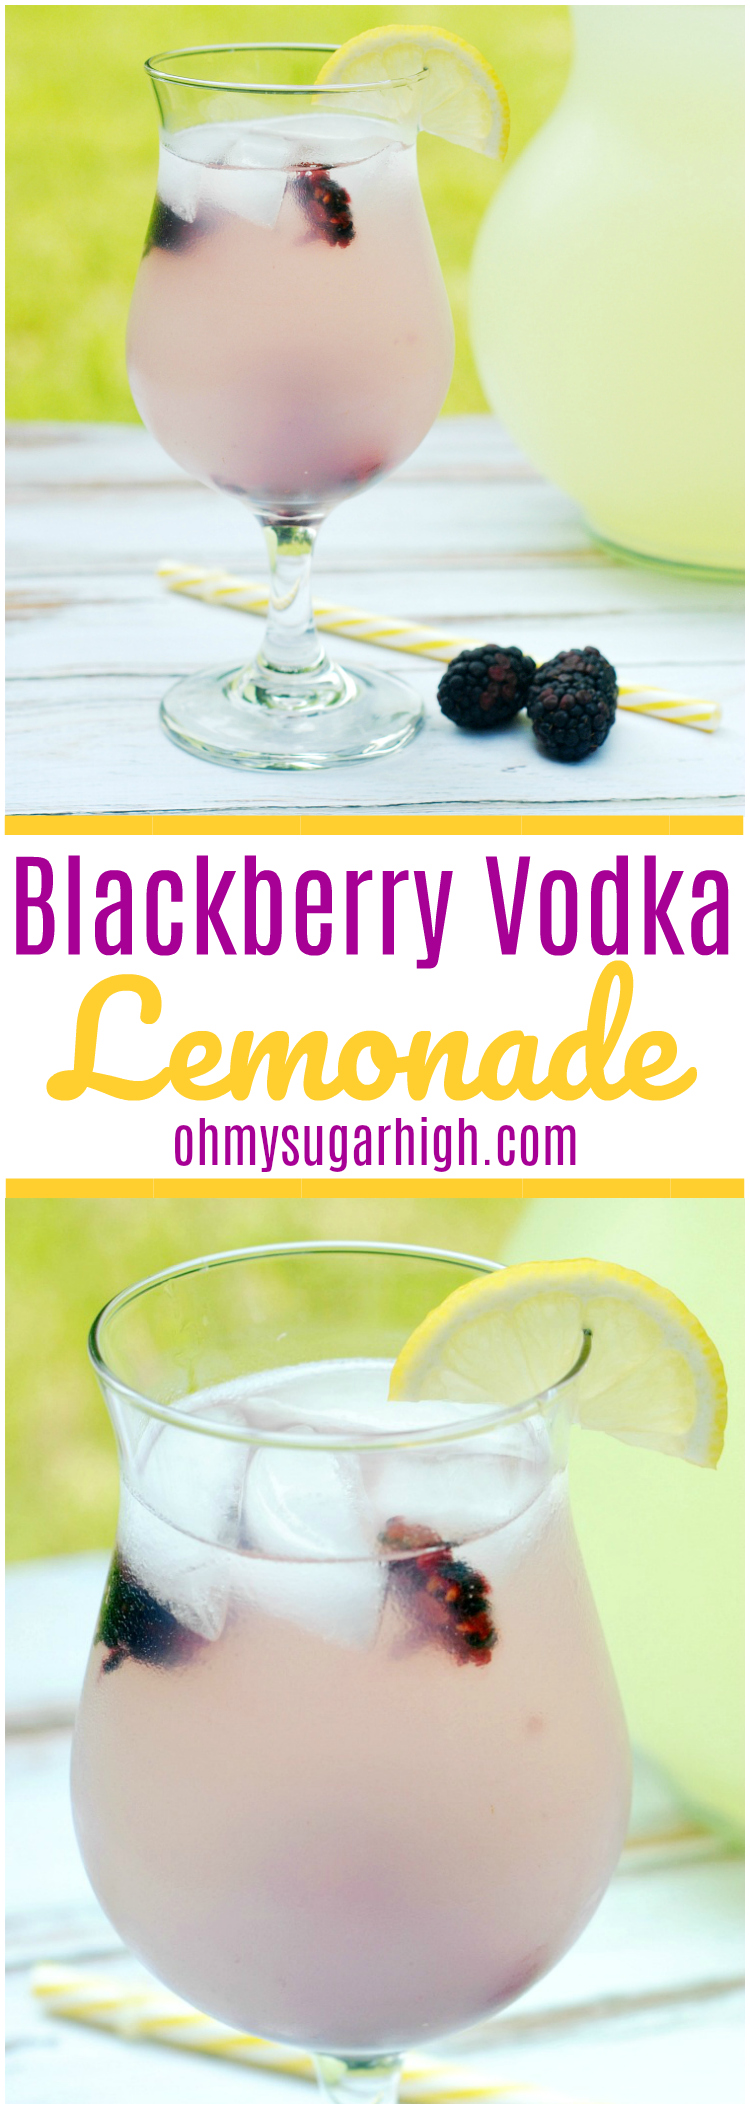 Looking for the perfect summer drink recipes? This Blackberry Vodka Lemonade is a refreshing vodka and lemonade drink recipe. Made with Pinnacle vodka, this cocktail is the perfect addition to your vodka drinks recipe collection and is great for entertaining!